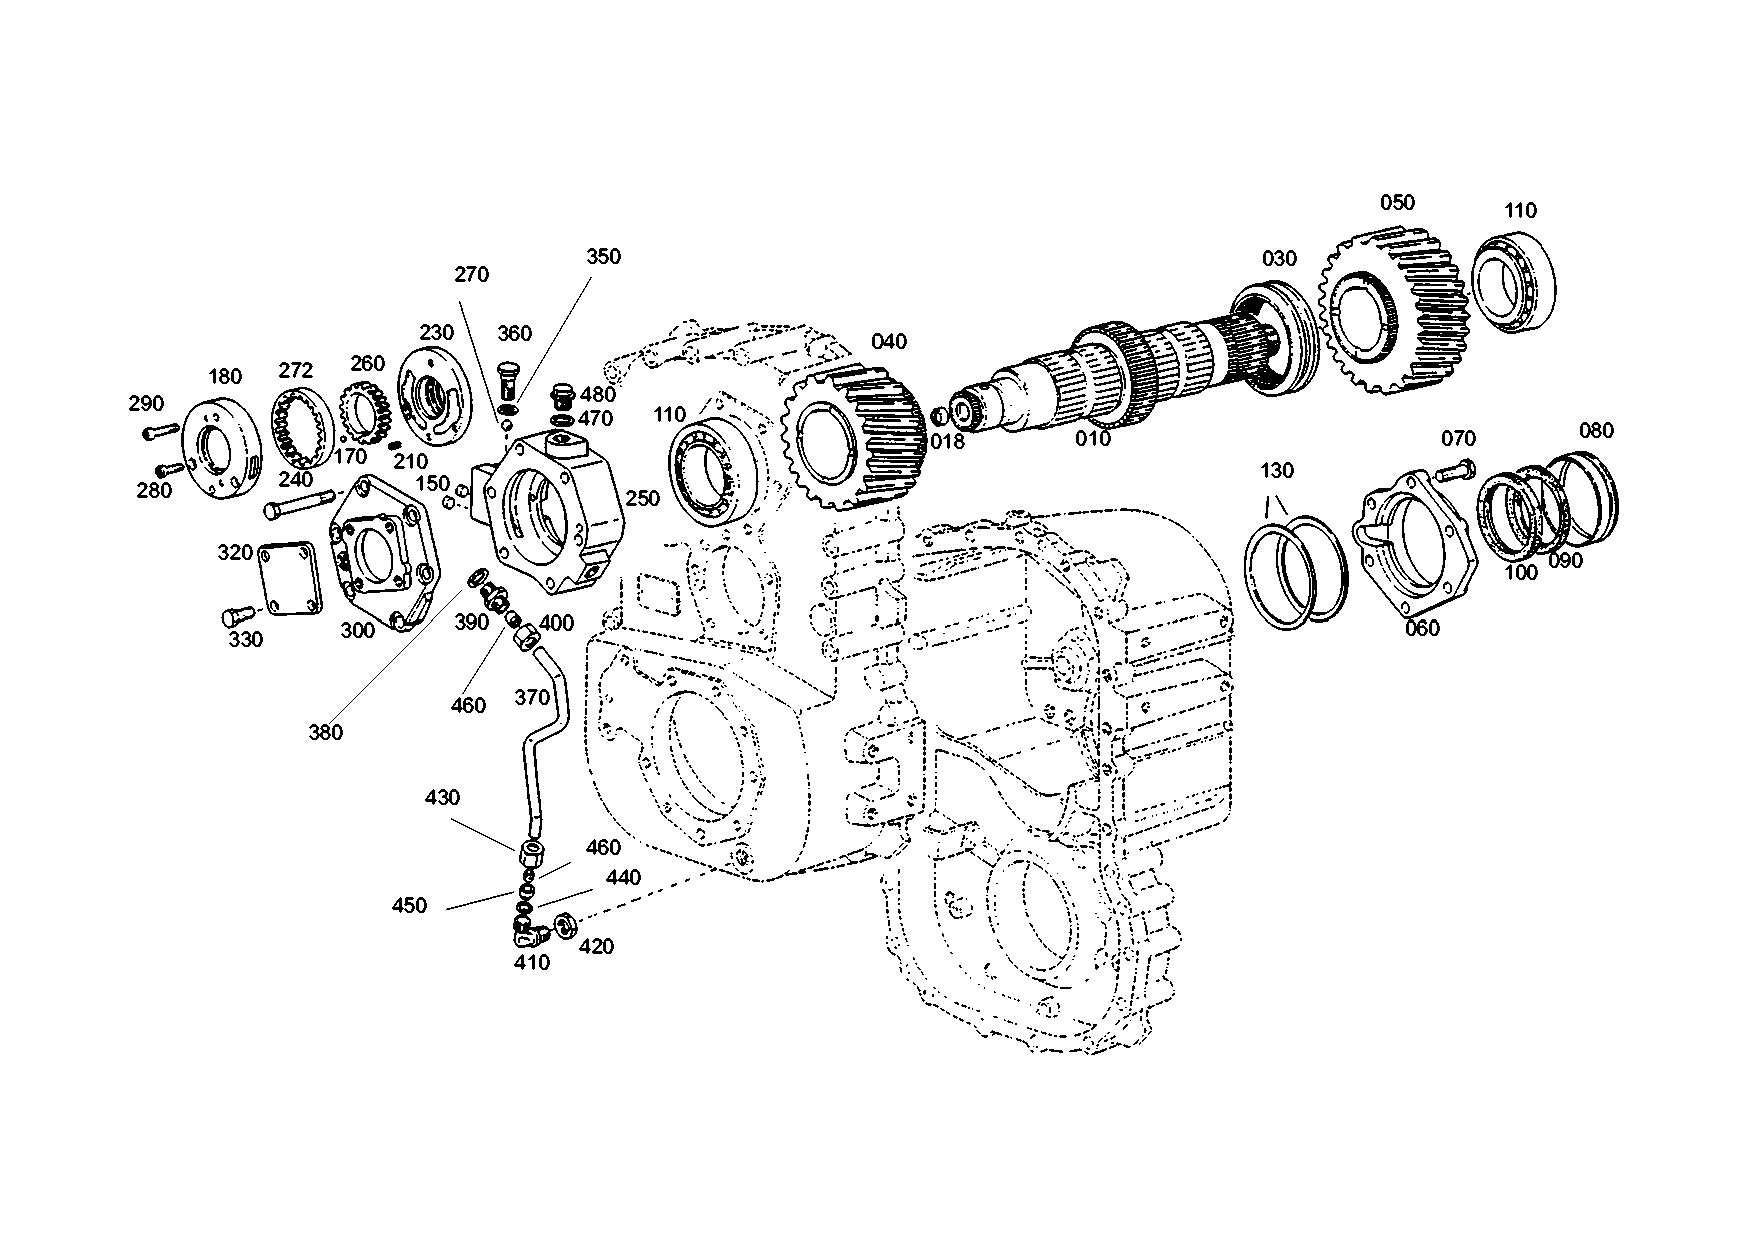 drawing for MARMON Herring MVG202007 - INPUT SHAFT (figure 1)